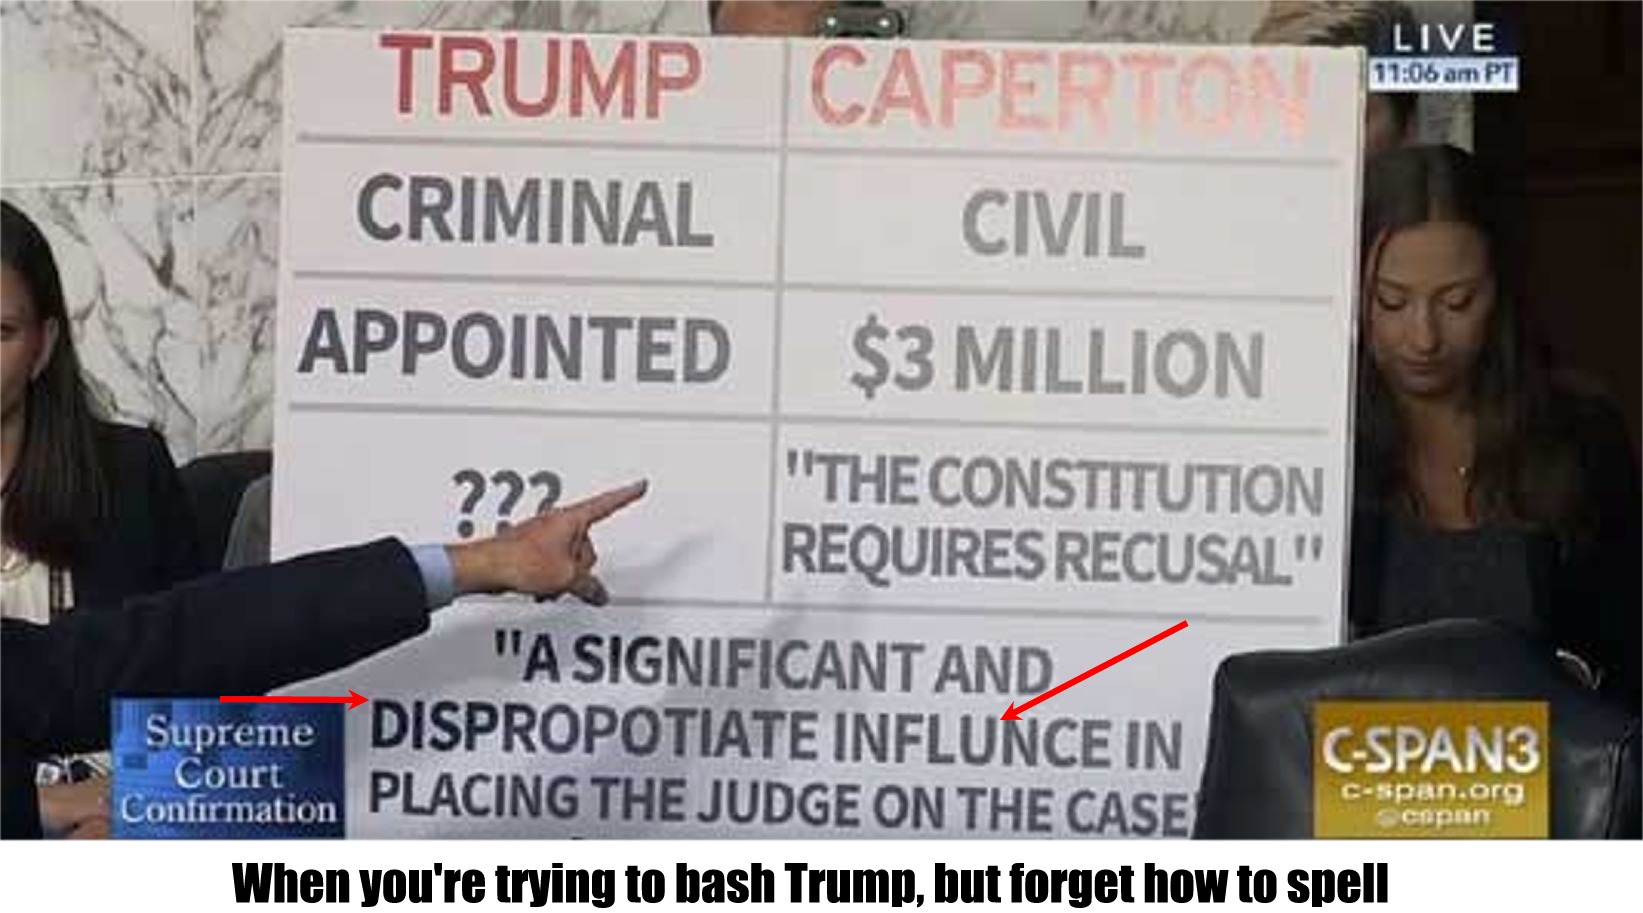 memes - presentation - Live Pt Trump Caperton Criminal Civil Appointed $3 Million "The Constitution Requires Recusal" "A Significant And Supreme Dispropotiate Influnce In GSPAN3 Courton Placing The Judge On The Case When you're trying to bash Trump, but f